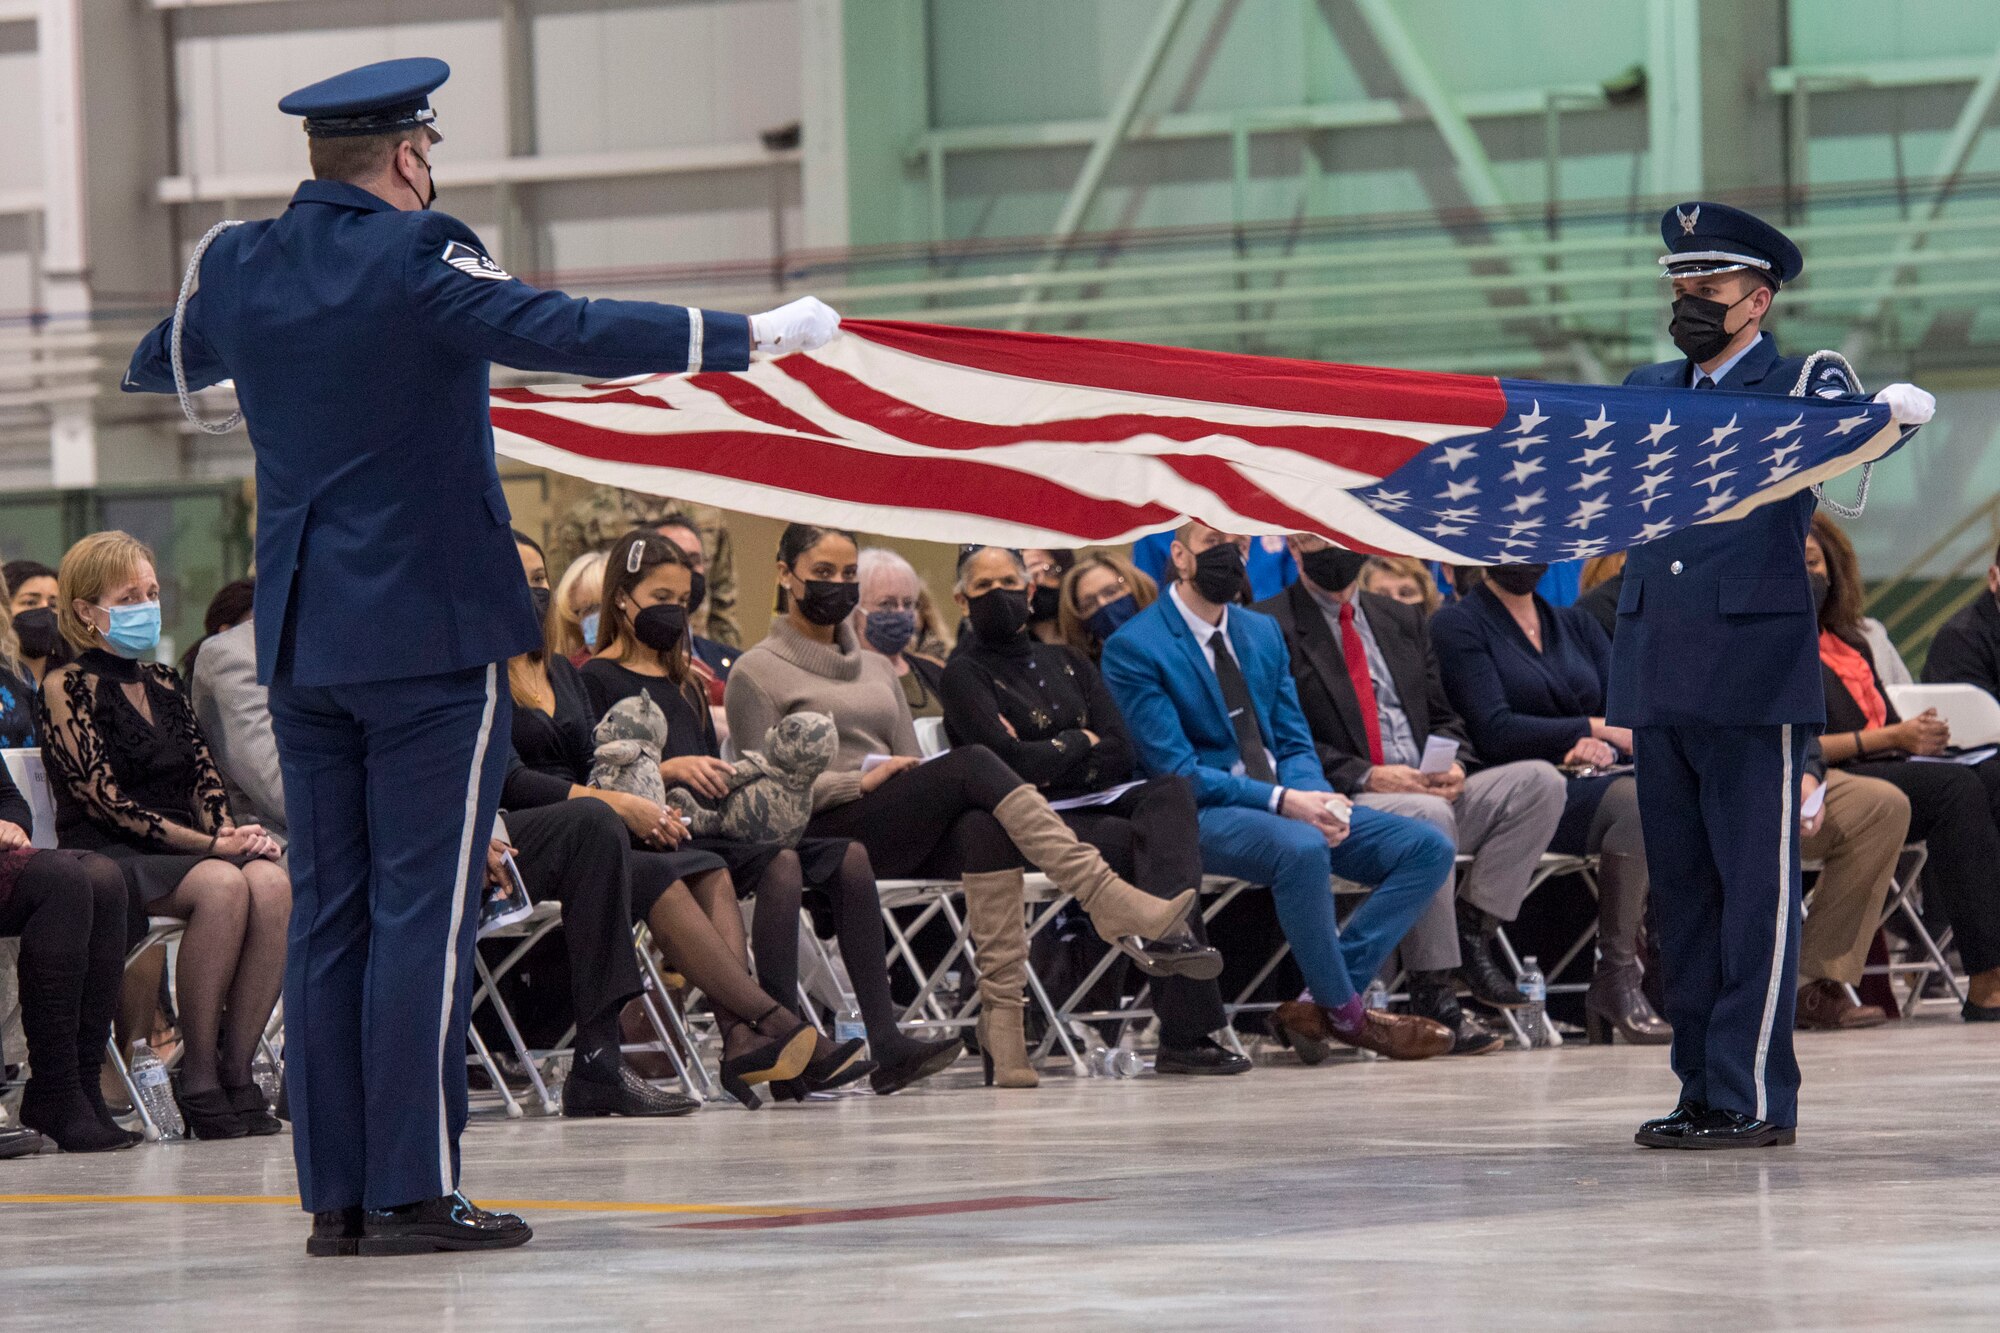 167th Airlift Wing base honor guard members, Master Sgt. Justin Bird and Tech. Sgt. Travis Hall perform a flag folding during a memorial service held at the 167th Airlift Wing, Shepherd Field, Martinsburg, West Virginia, March 6, 2021. Three American flags were presented to Young’s family during the service.